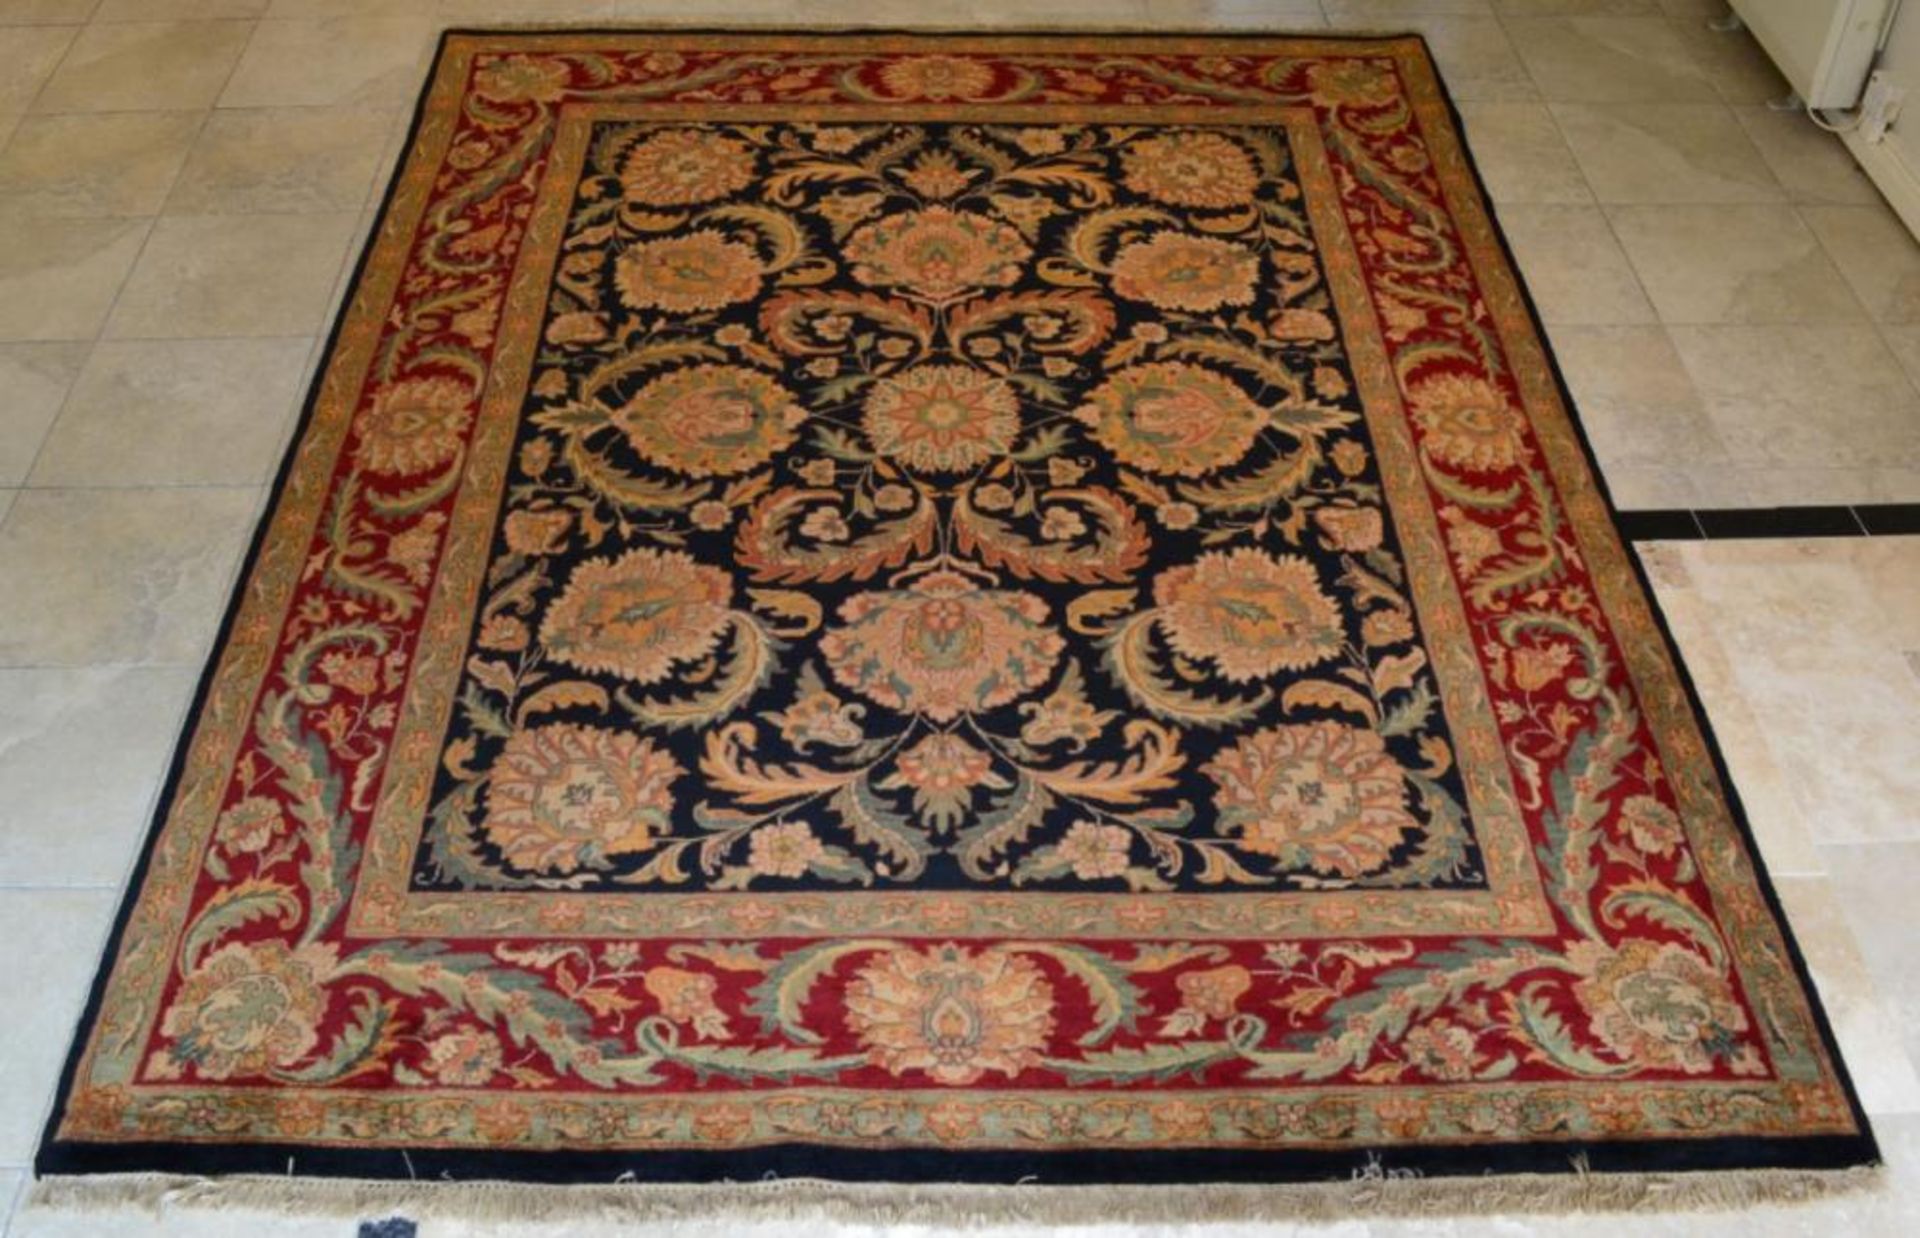 1 x Red and Black Jaipur Handknotted Carpet - Handwoven In Jaipur With Handspun Wool And Vegetable - Image 11 of 16